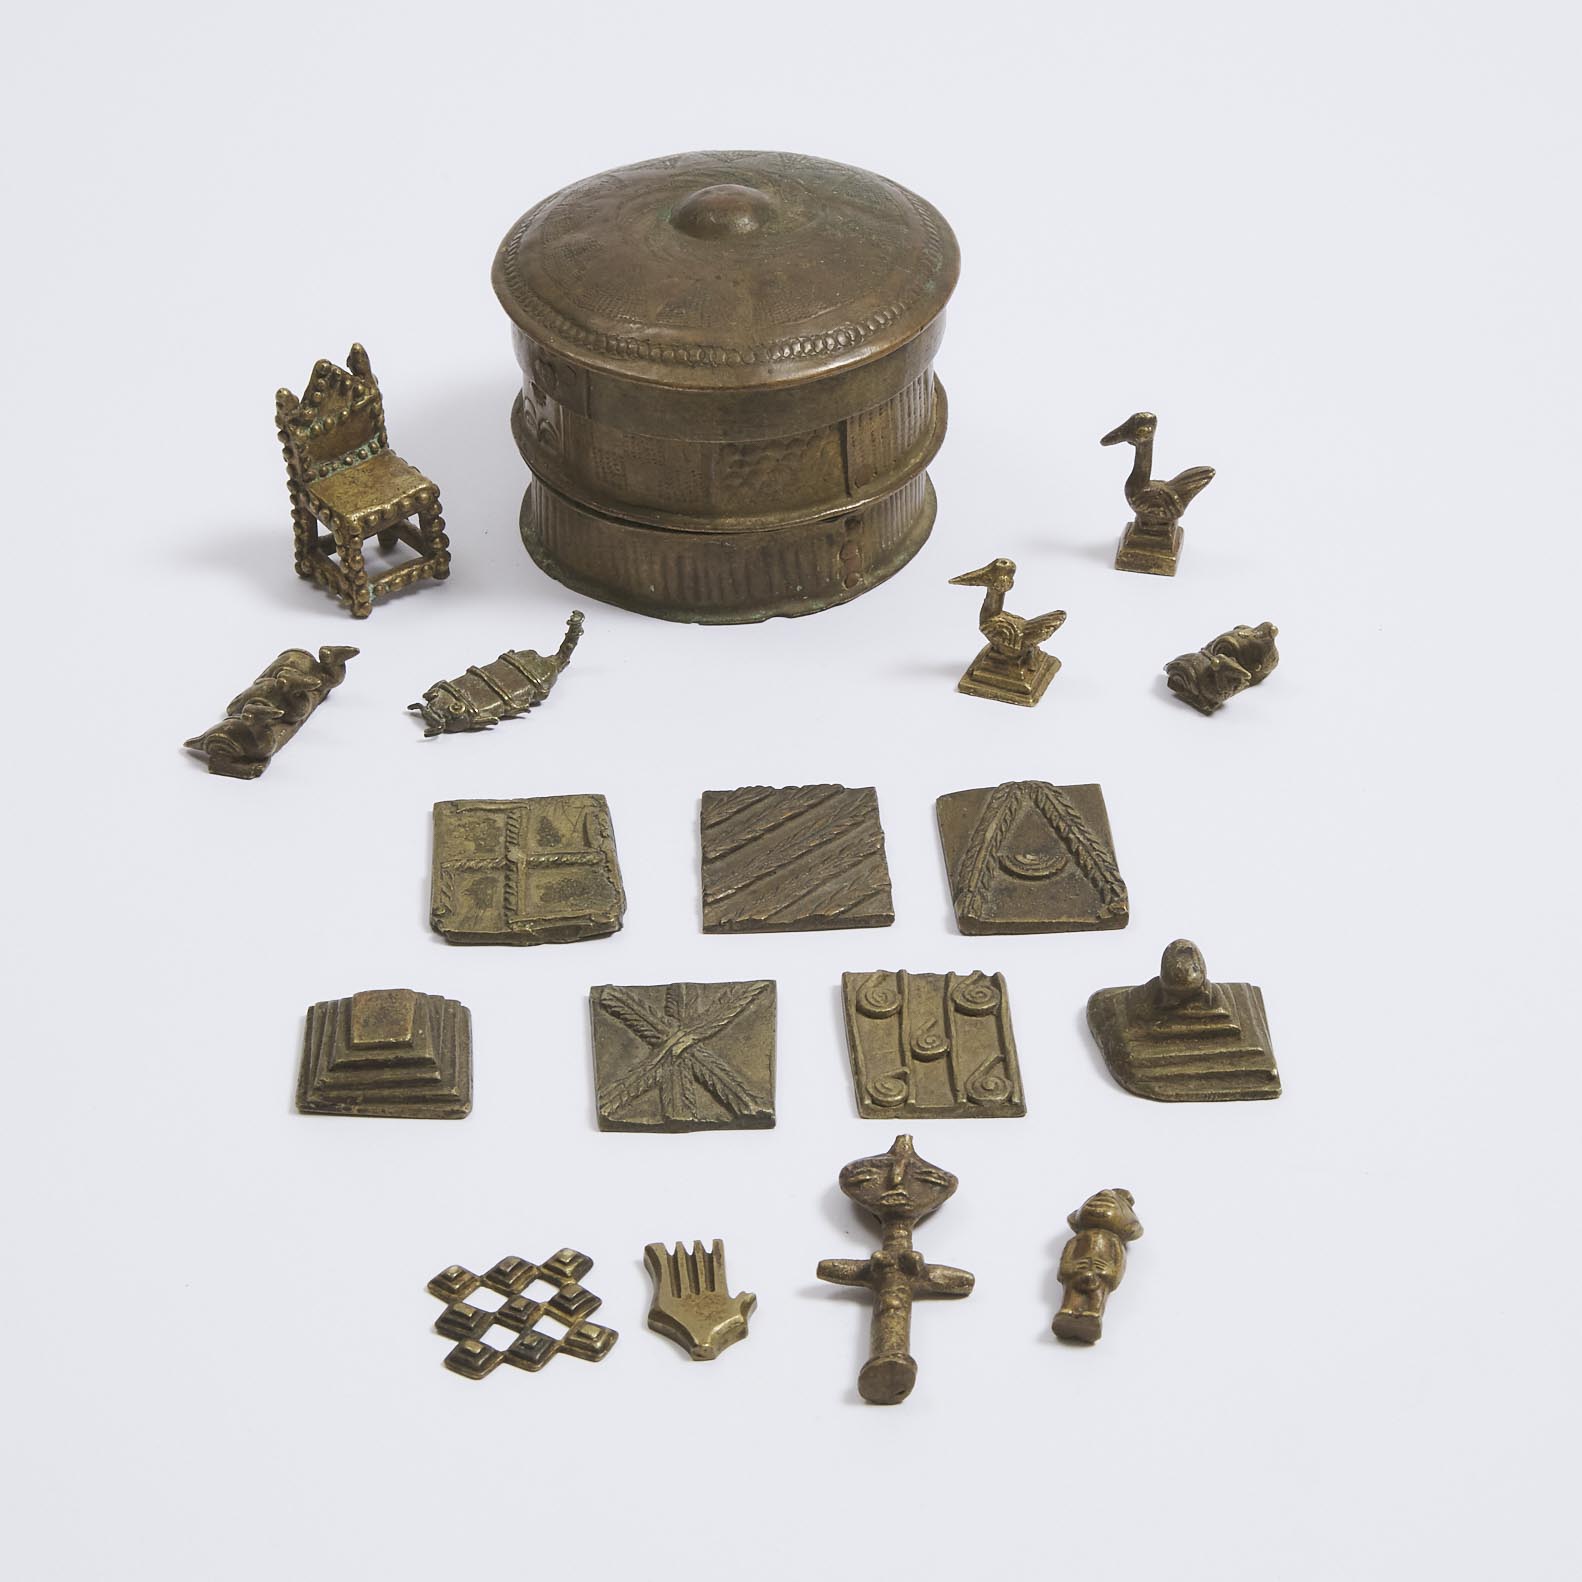 17 Akan/Ashanti Goldweights together with an Ashanti Brass Forowa Container, Ghana, West Africa, 19th/20th century